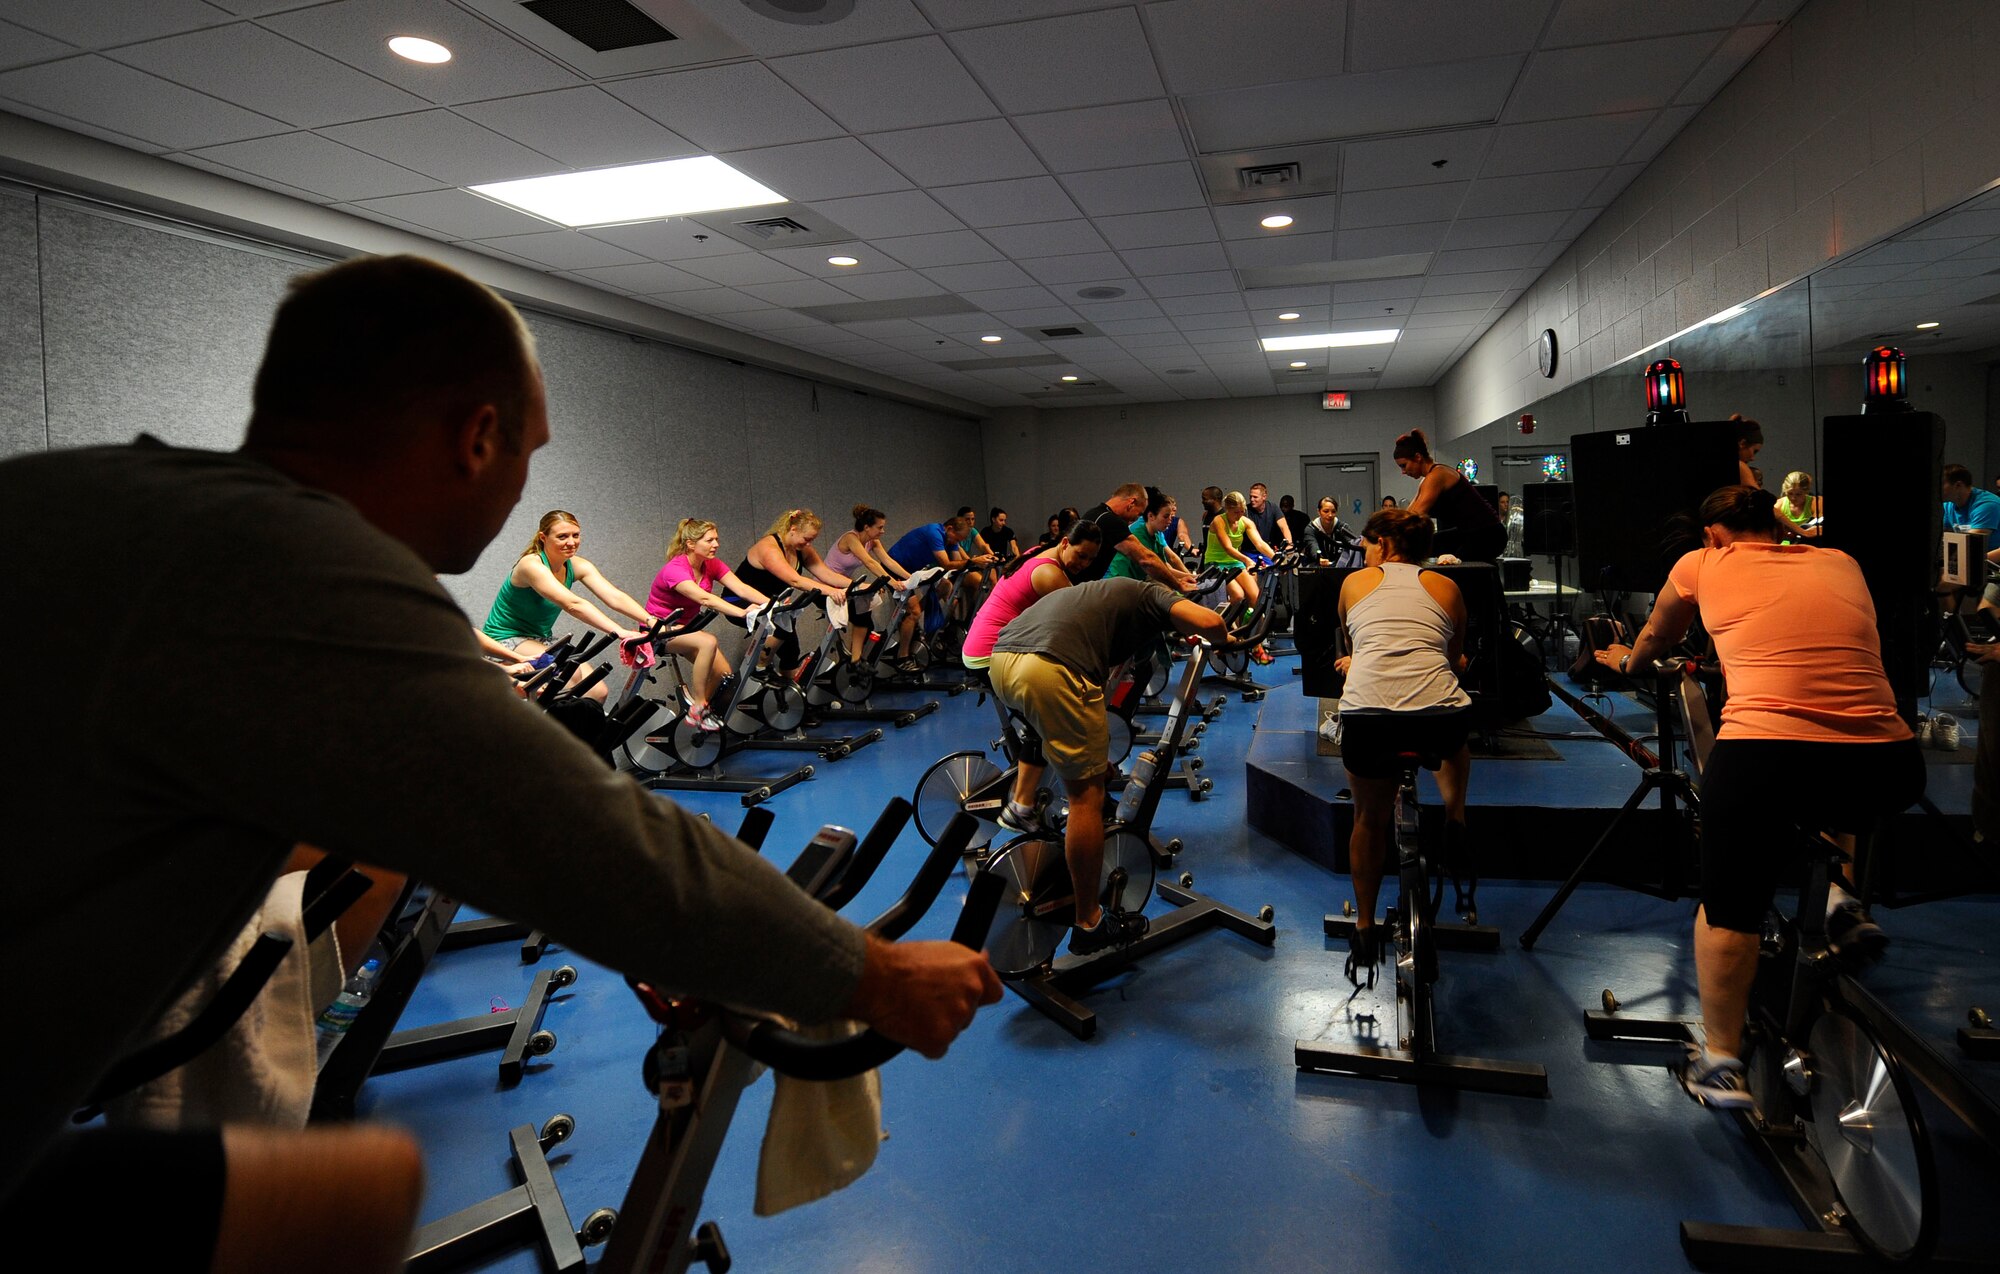 Hurlburt members begin a spin class at the Aderholt Gym on Hurlburt Field, Fla., Feb. 20, 2014. Spin class delivers a cardio, strength and endurance workout. (U.S. Air Force photo/Airman 1st Class Andrea Posey)